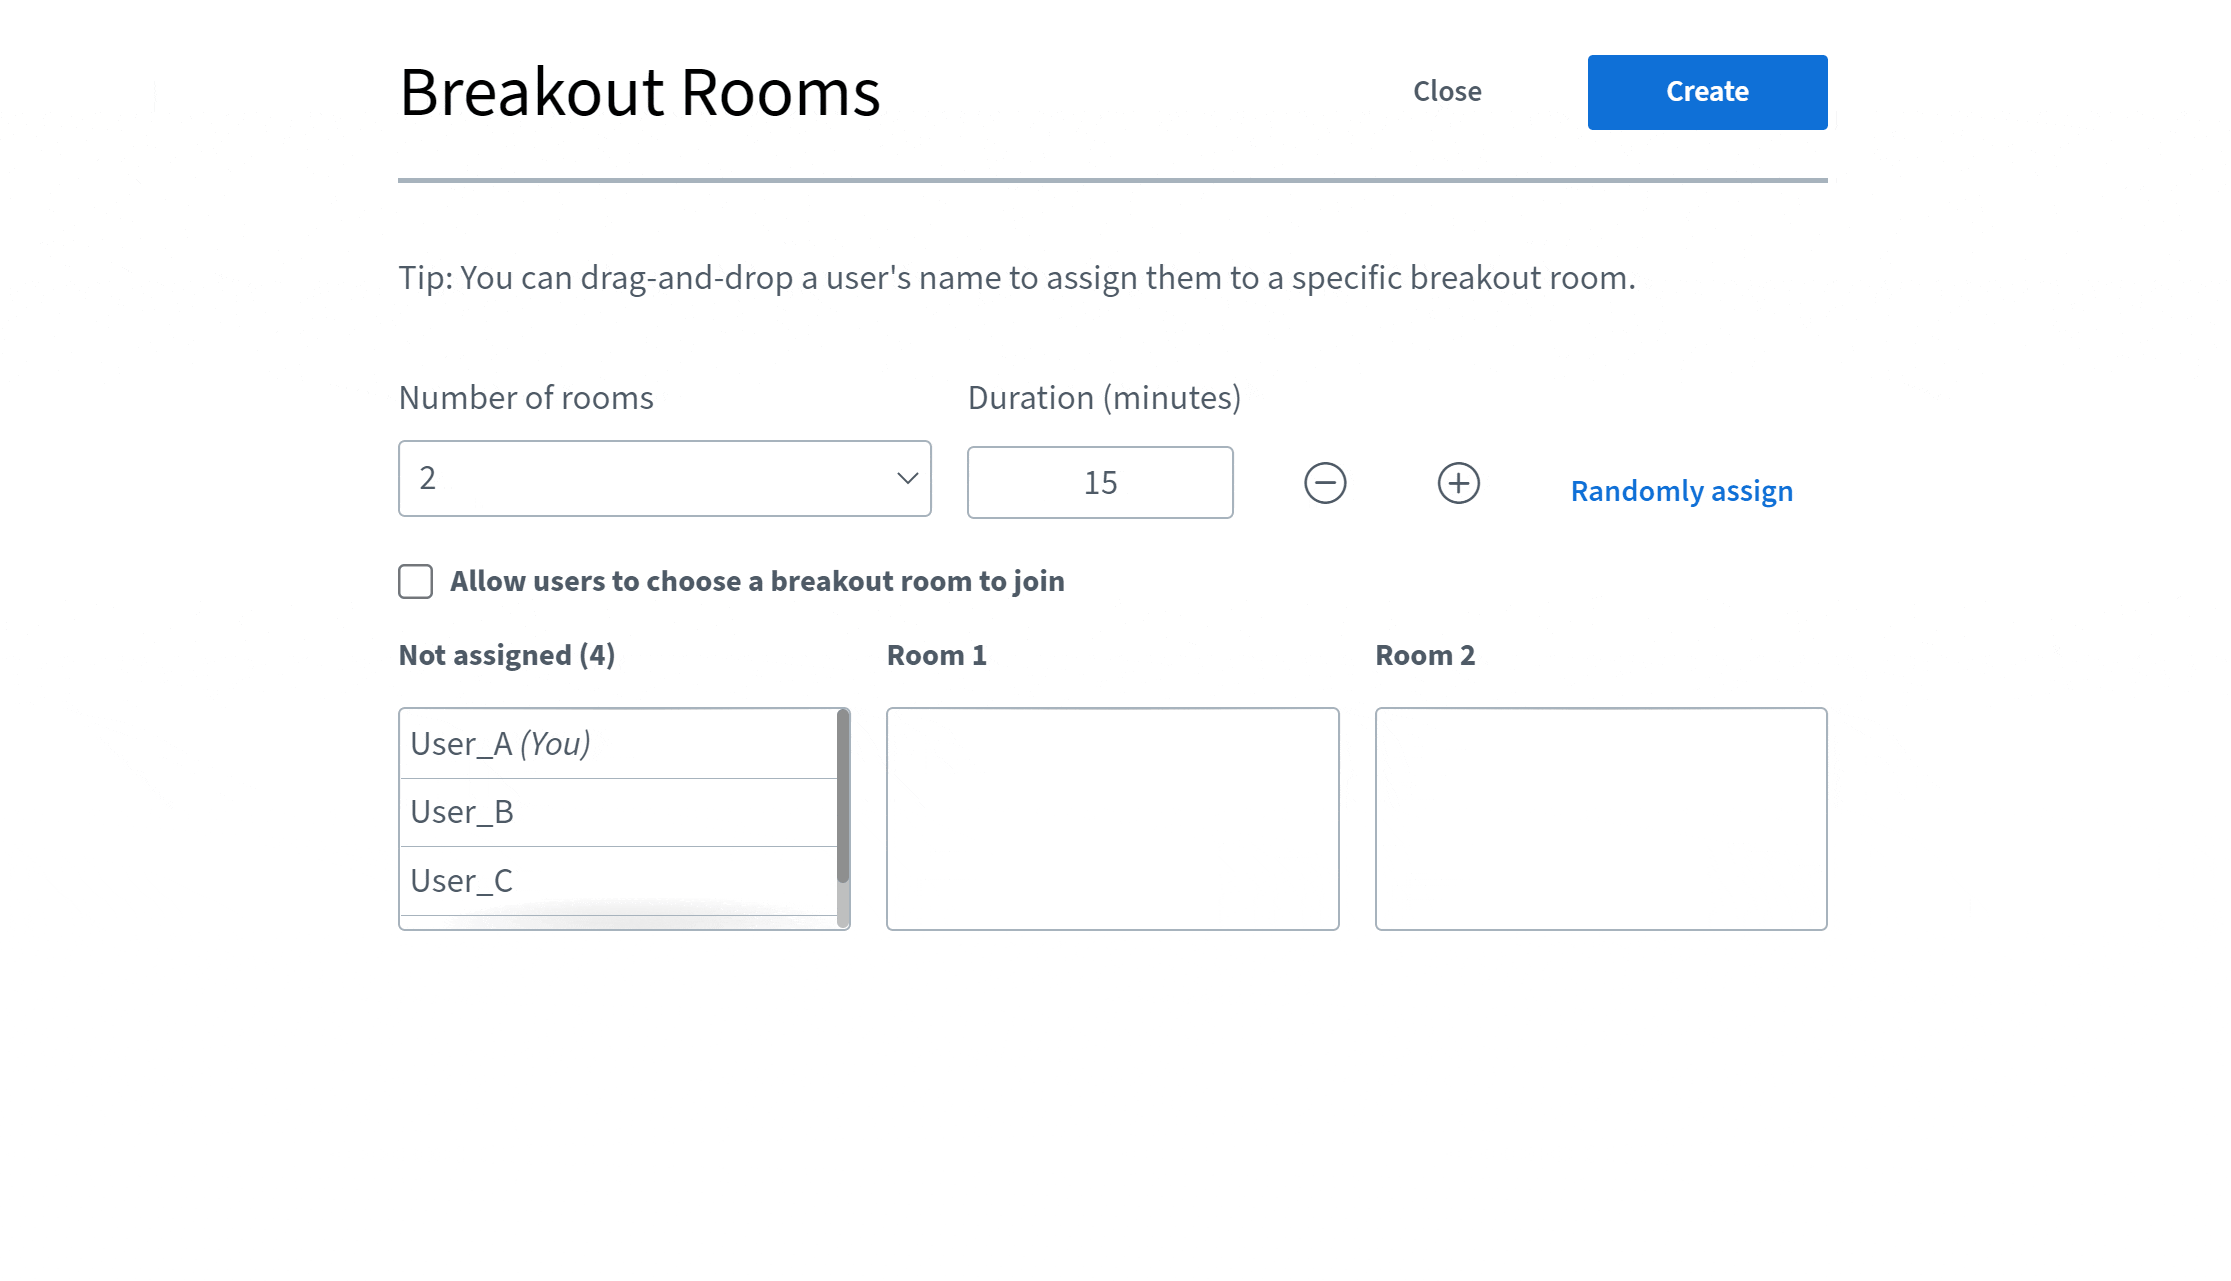 Animated image showing assignment of users to different rooms